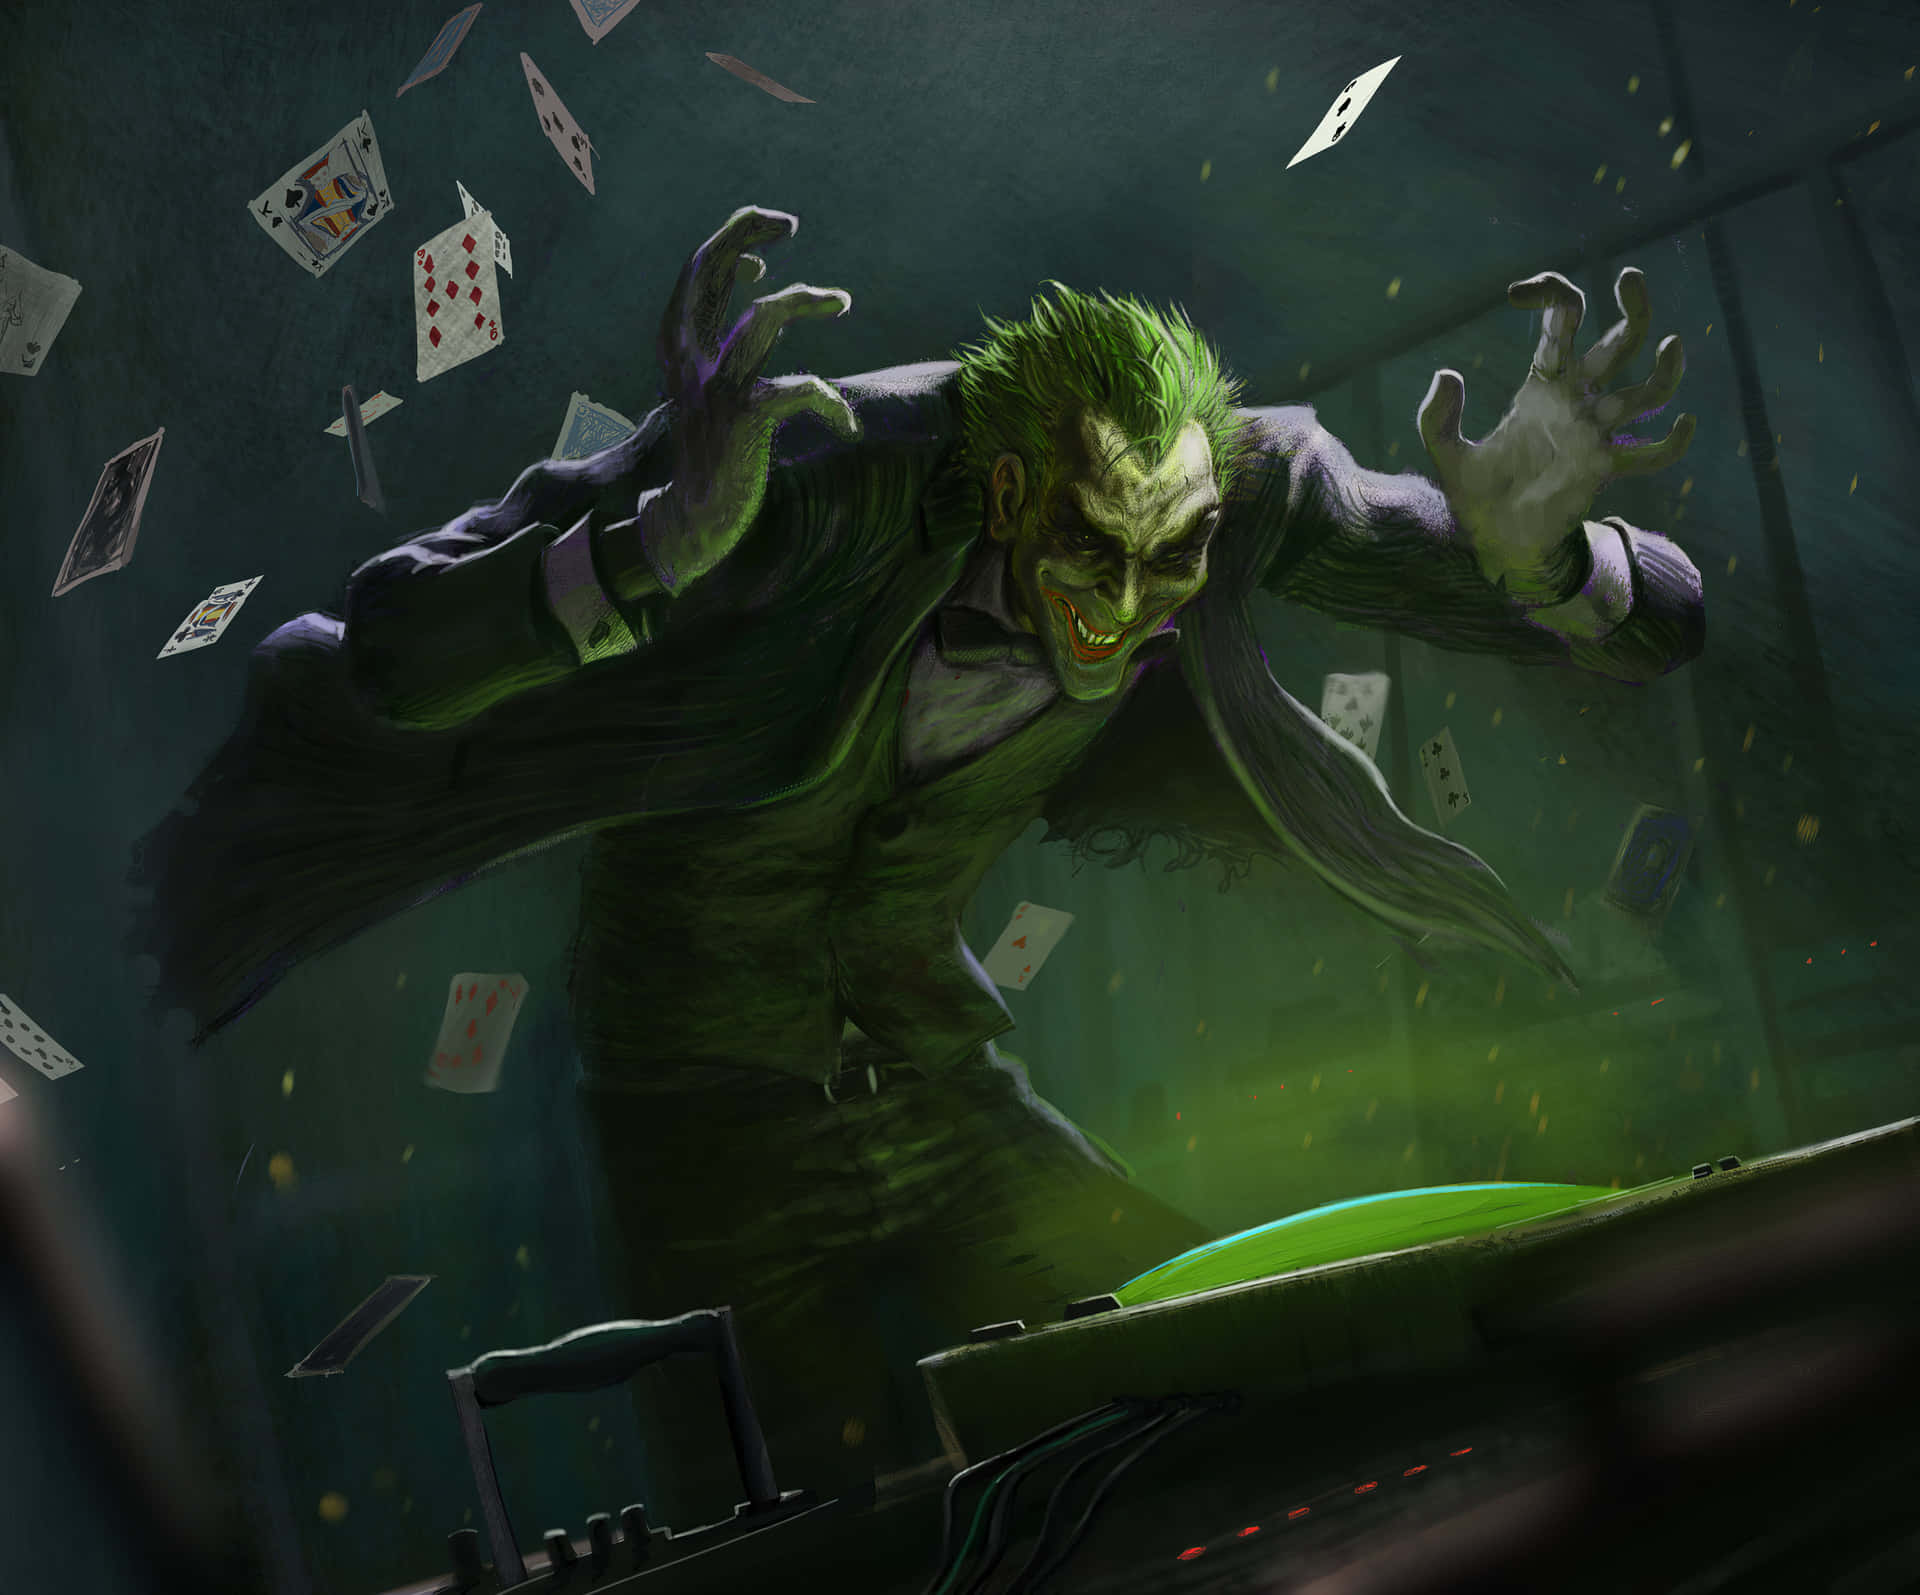 The Sinister Joker Card - A Mysterious Power Unleashed Wallpaper